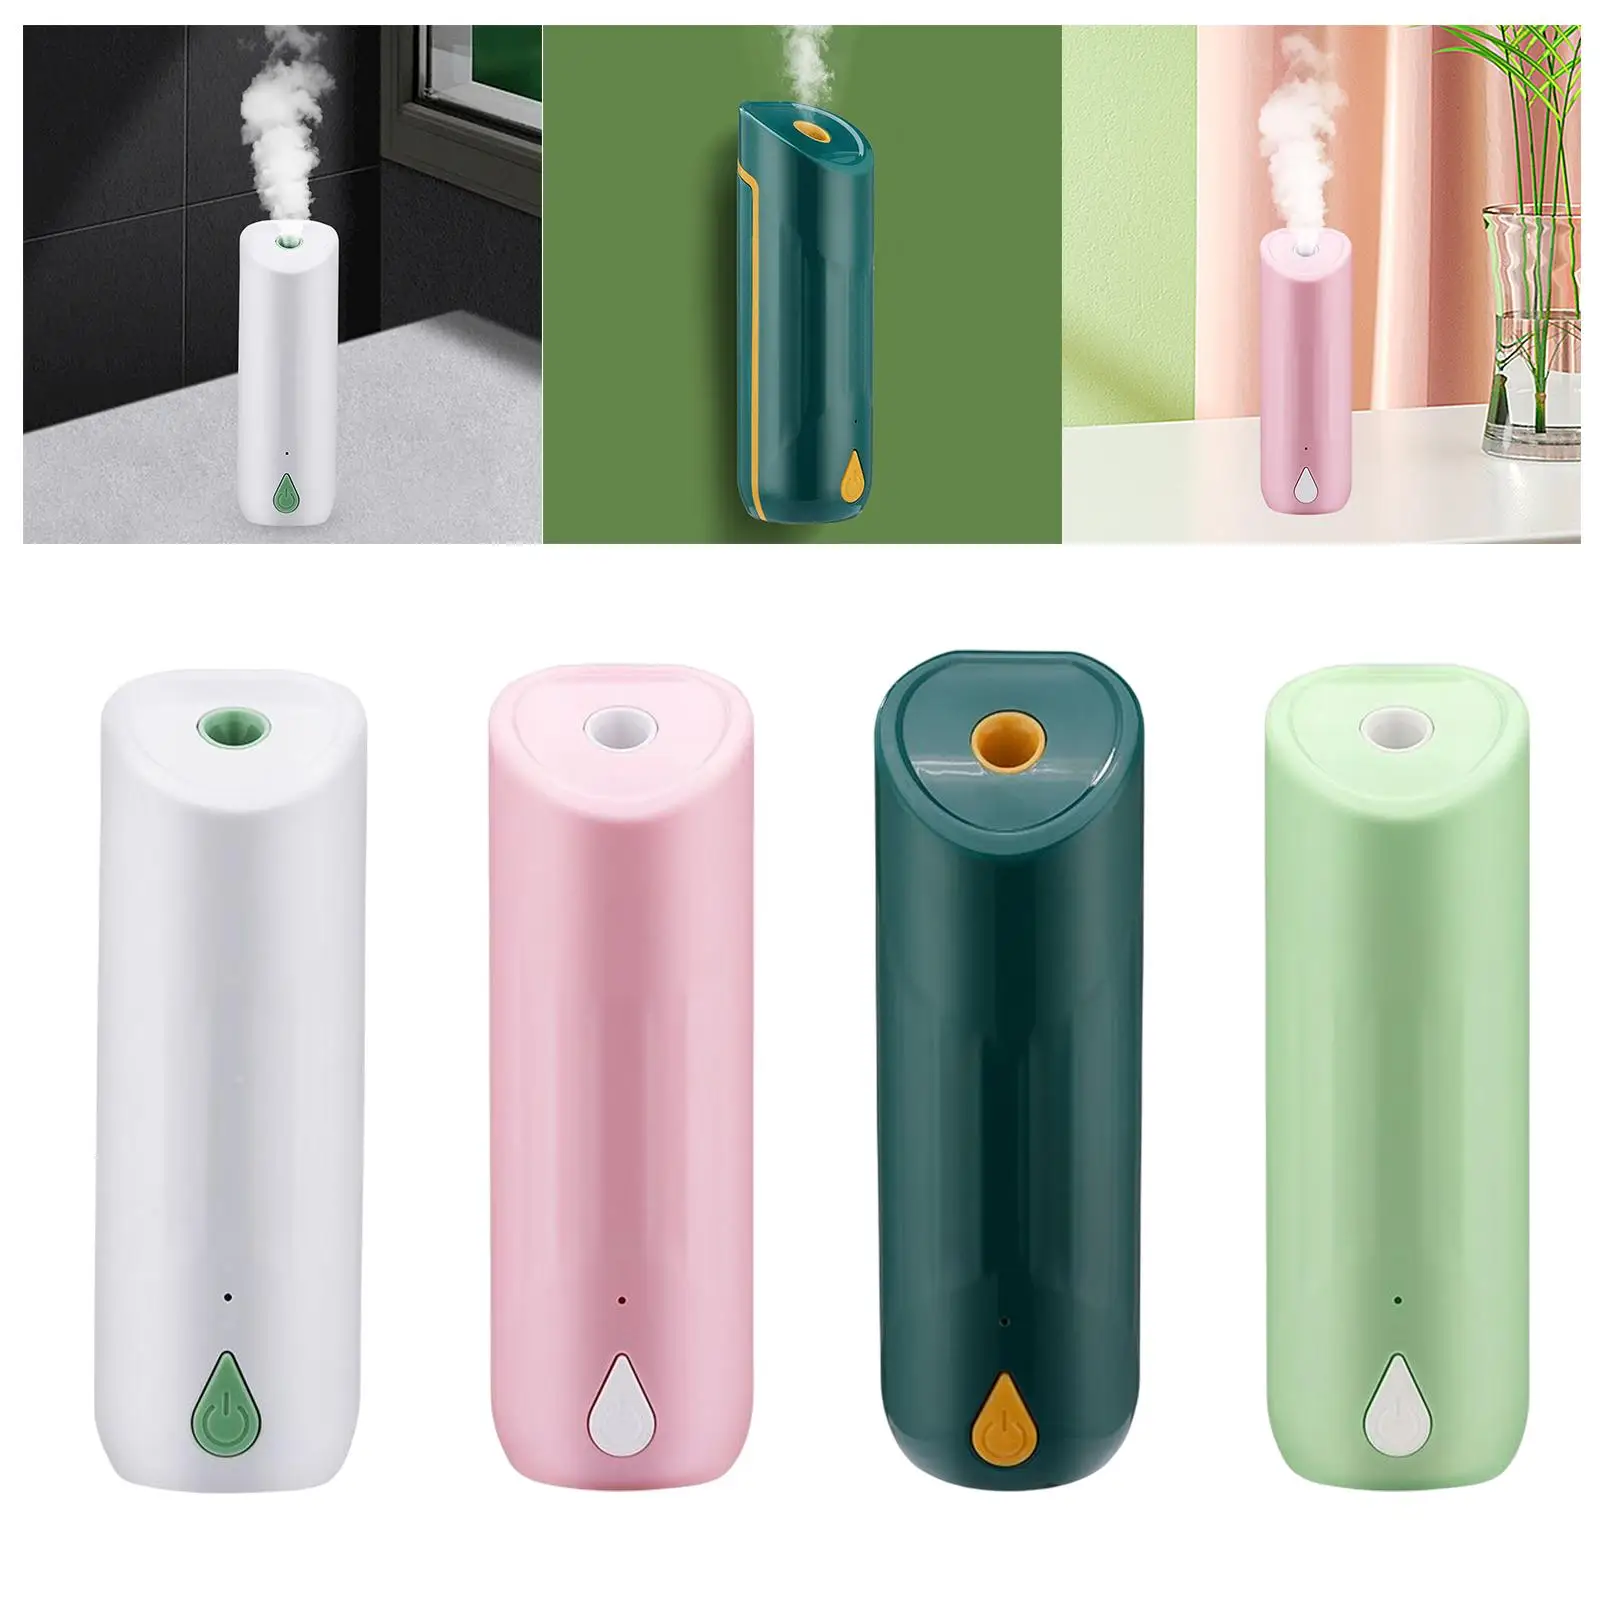 Automatic Fragrance Diffuser Spray Dispenser Noiseless Wall Mounted Air Humidifier Mist Sprayer for Living Room Office